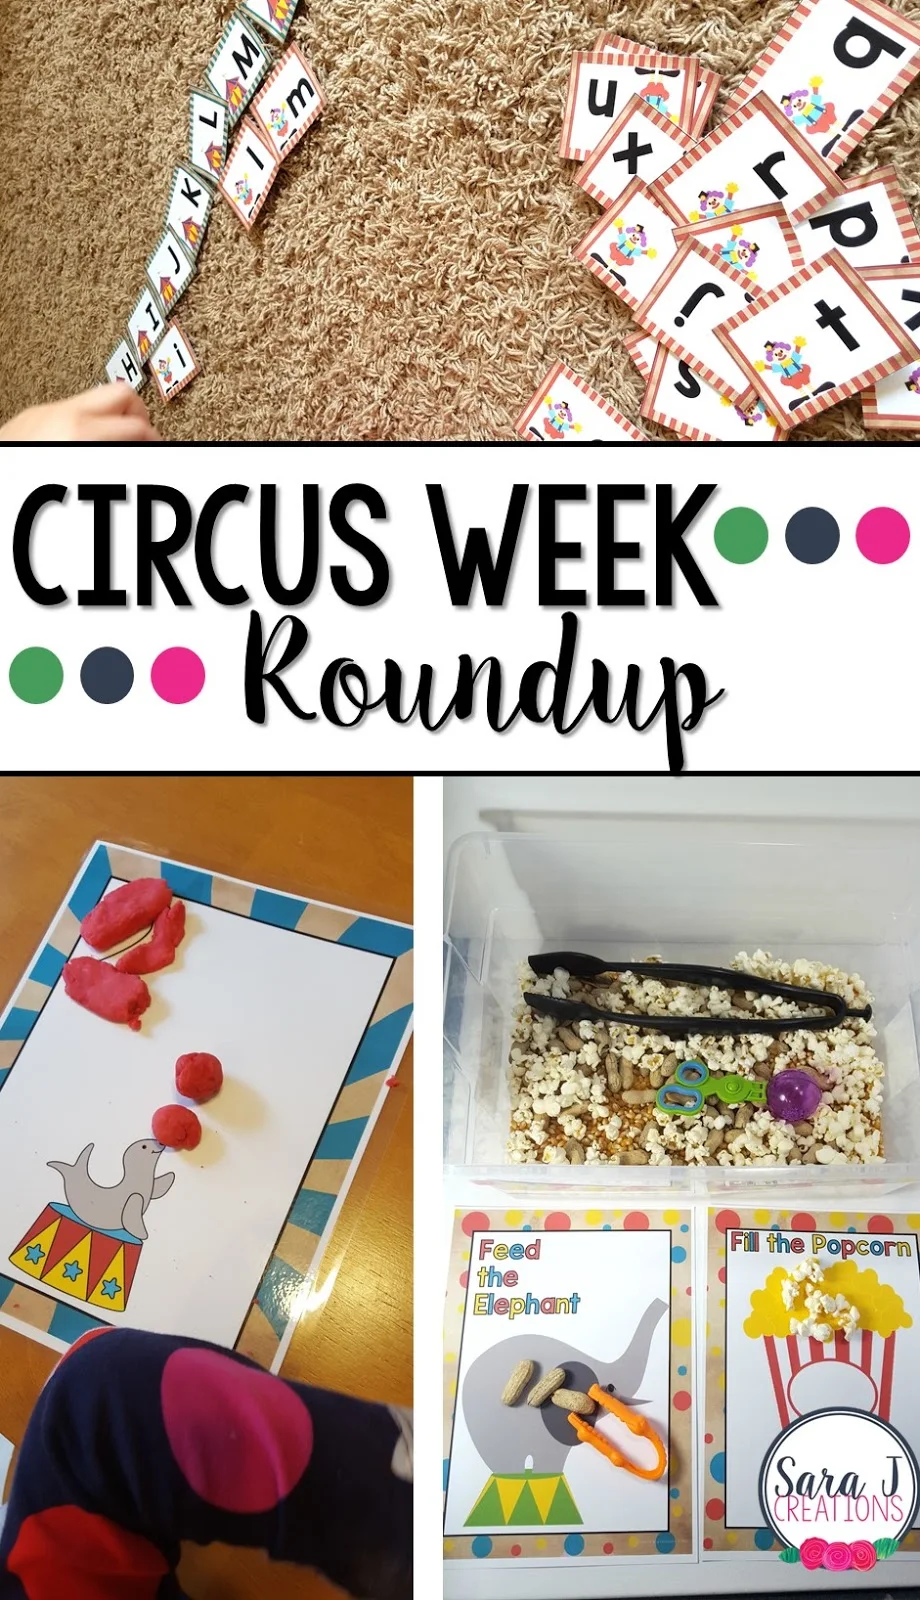 Books, fine motor, gross motor and alphabet practice ideas with a circus theme. Perfect for preschool!